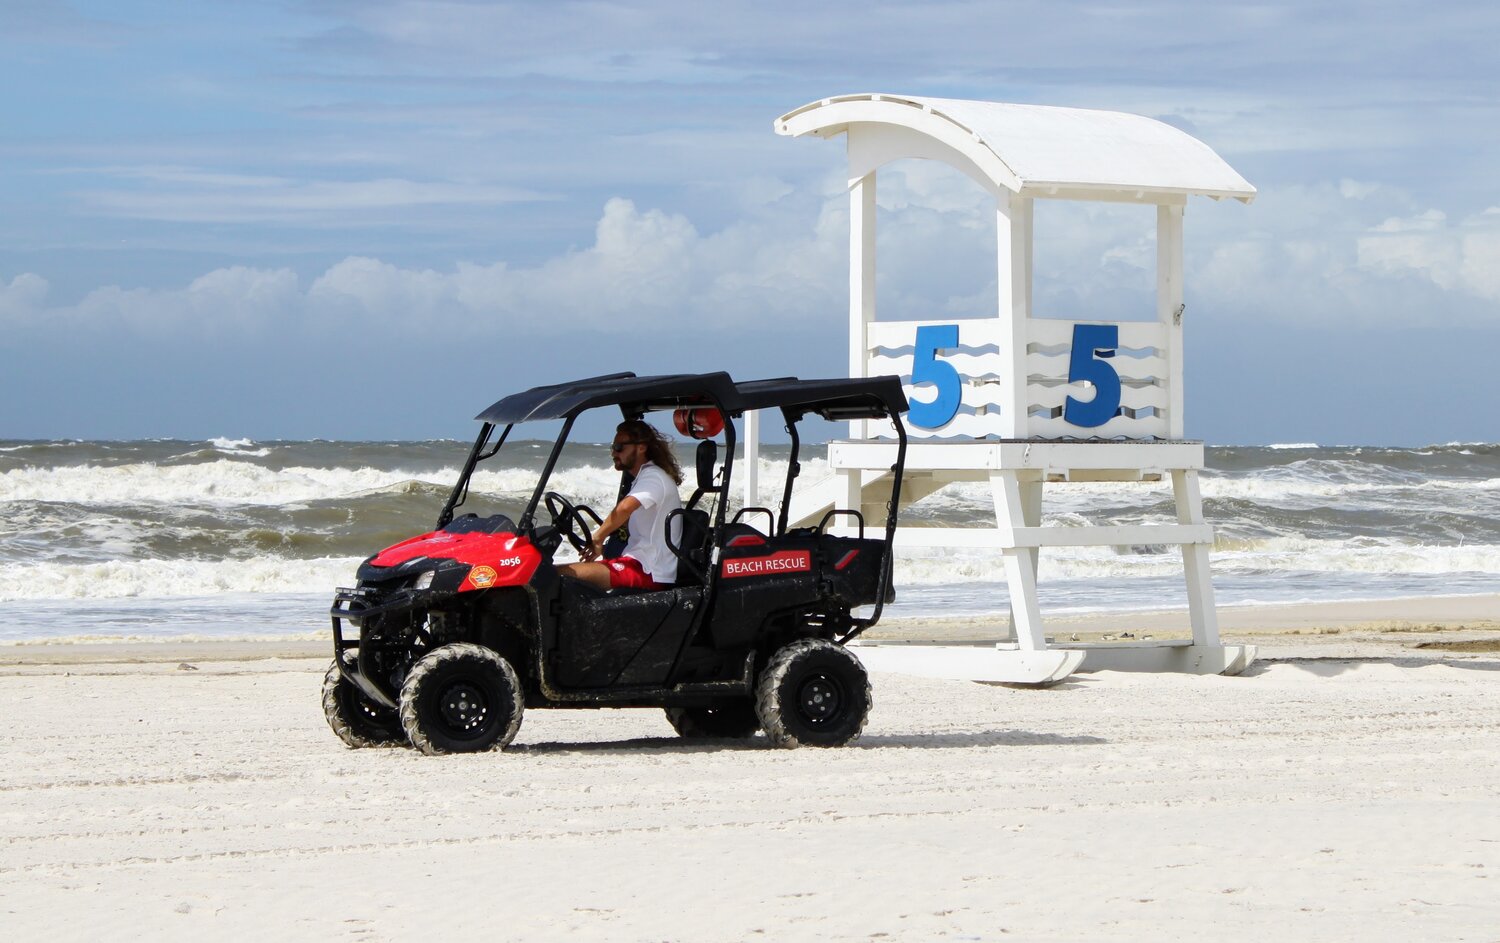 Gulf Shores lifeguard patrols the beach on a double red flag day. A double red flag signifies the water is closed.